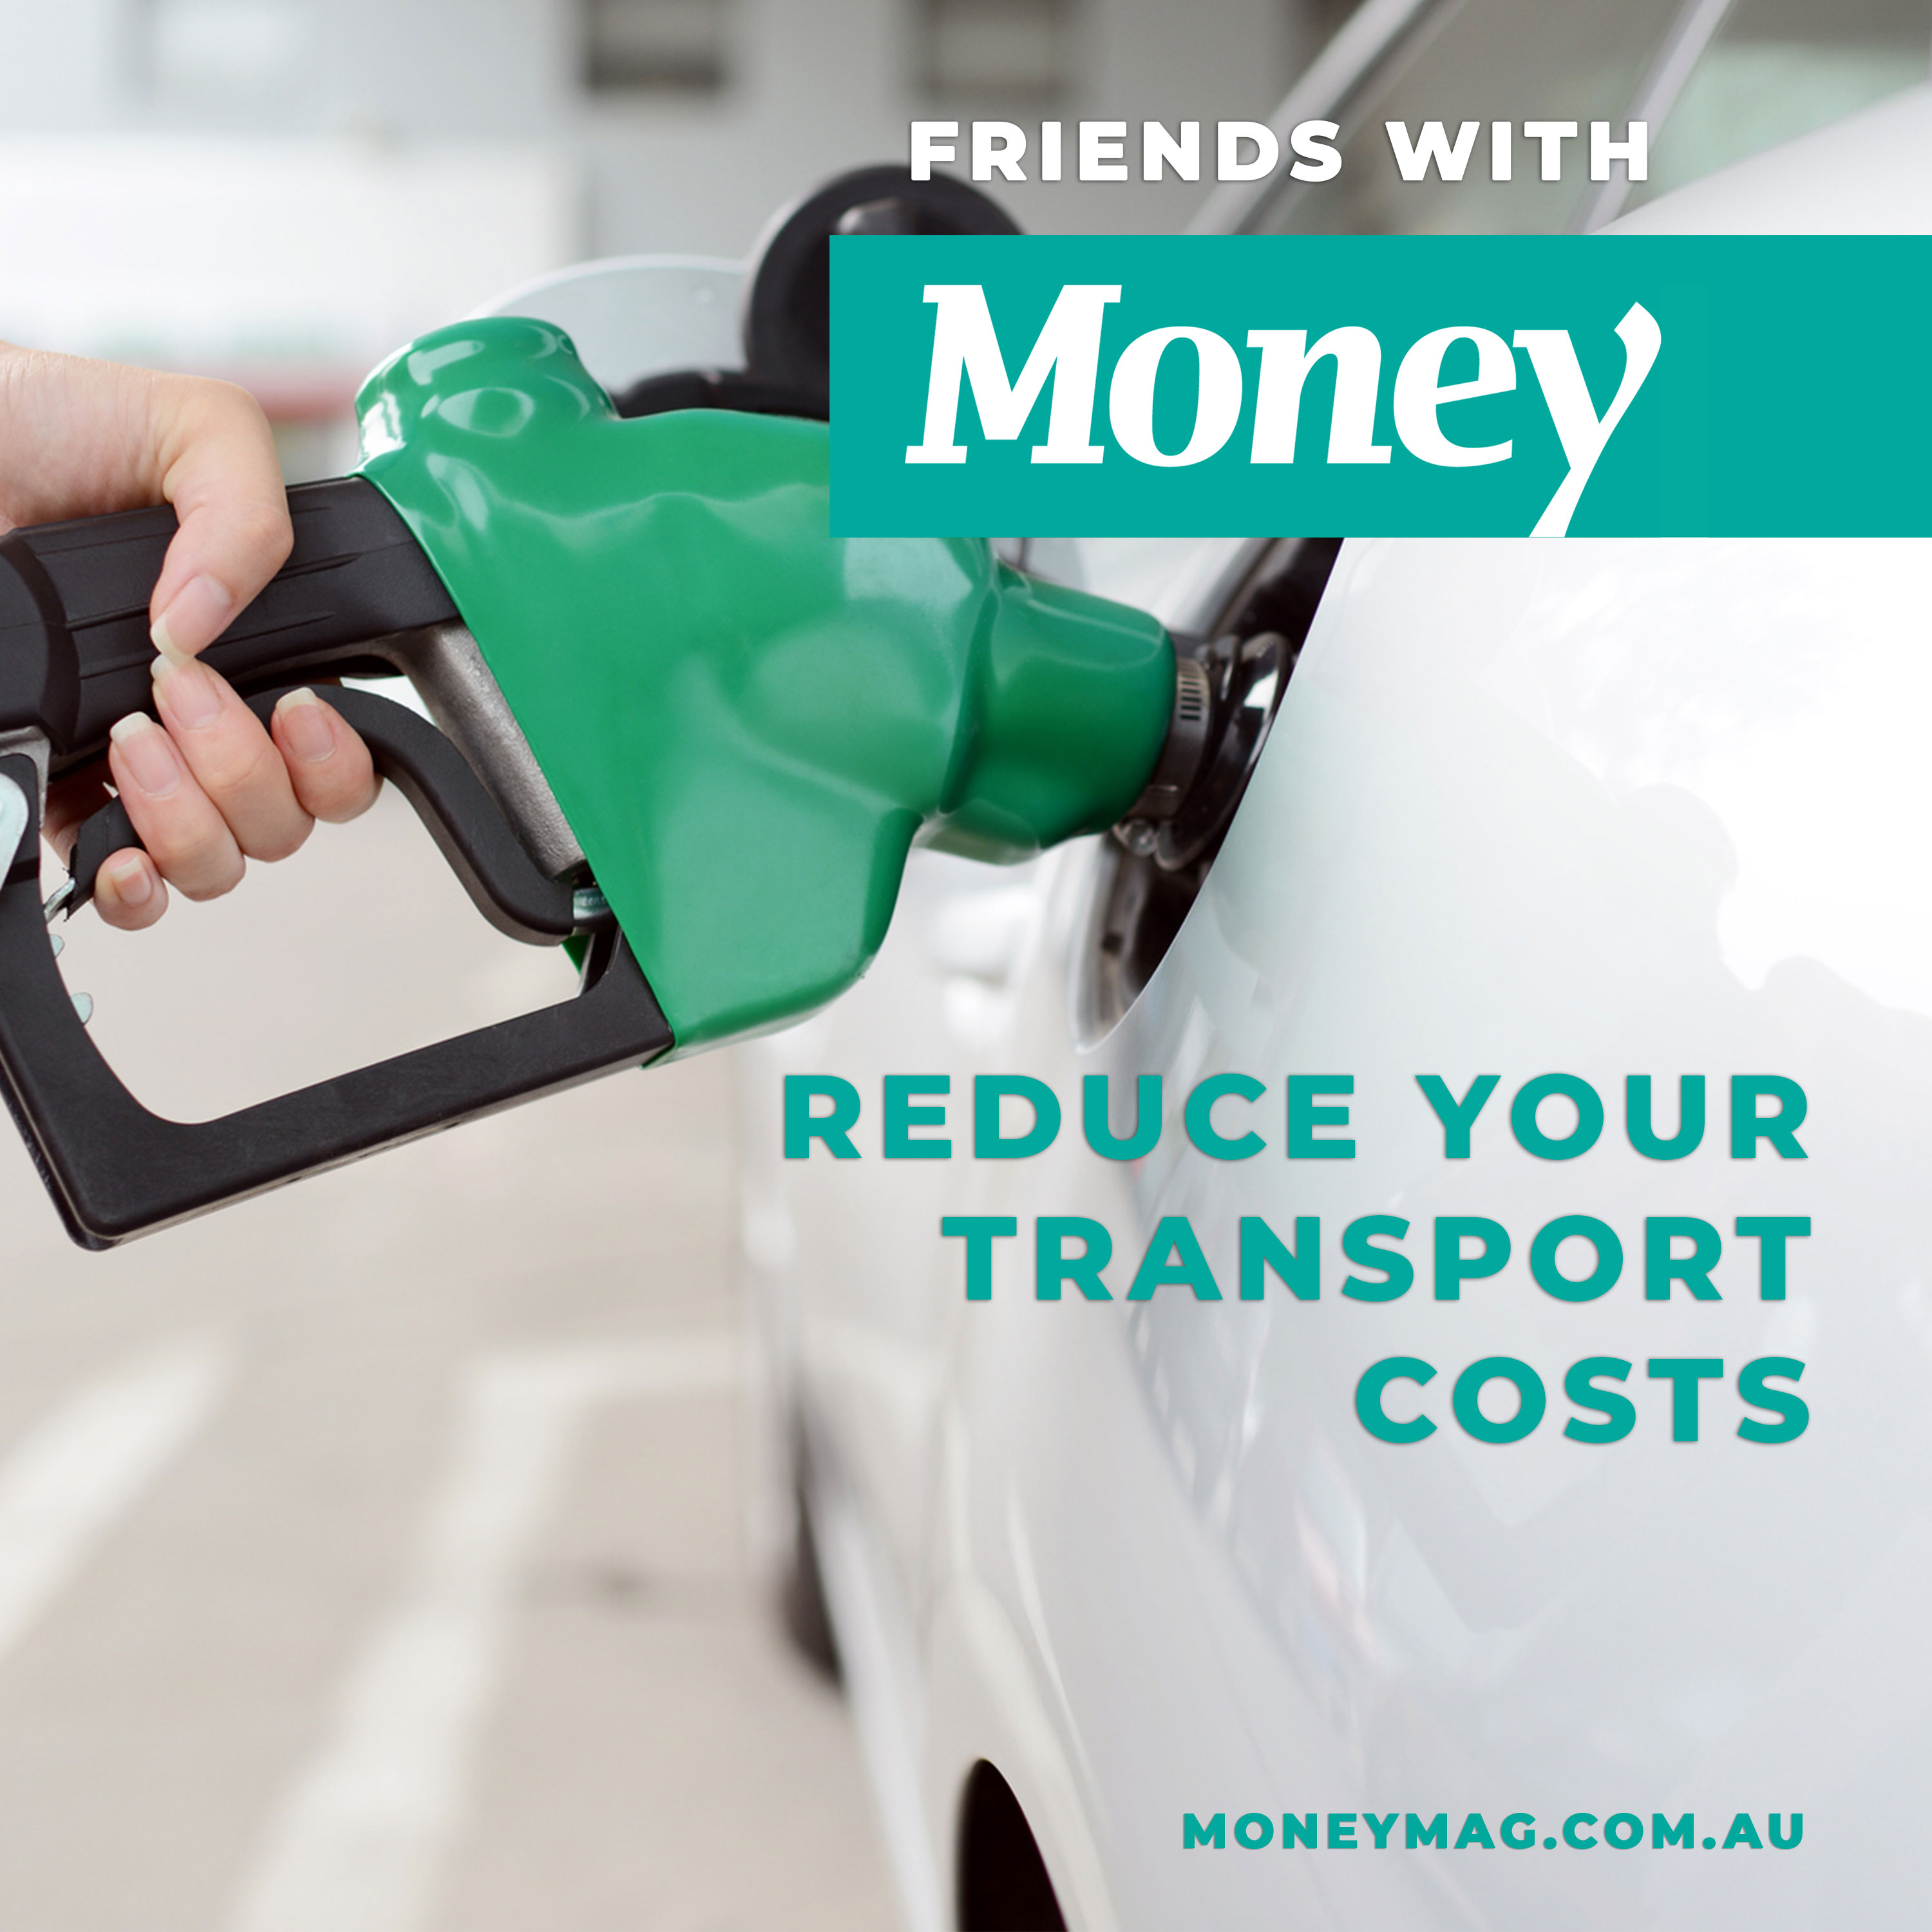 Reduce your transport costs